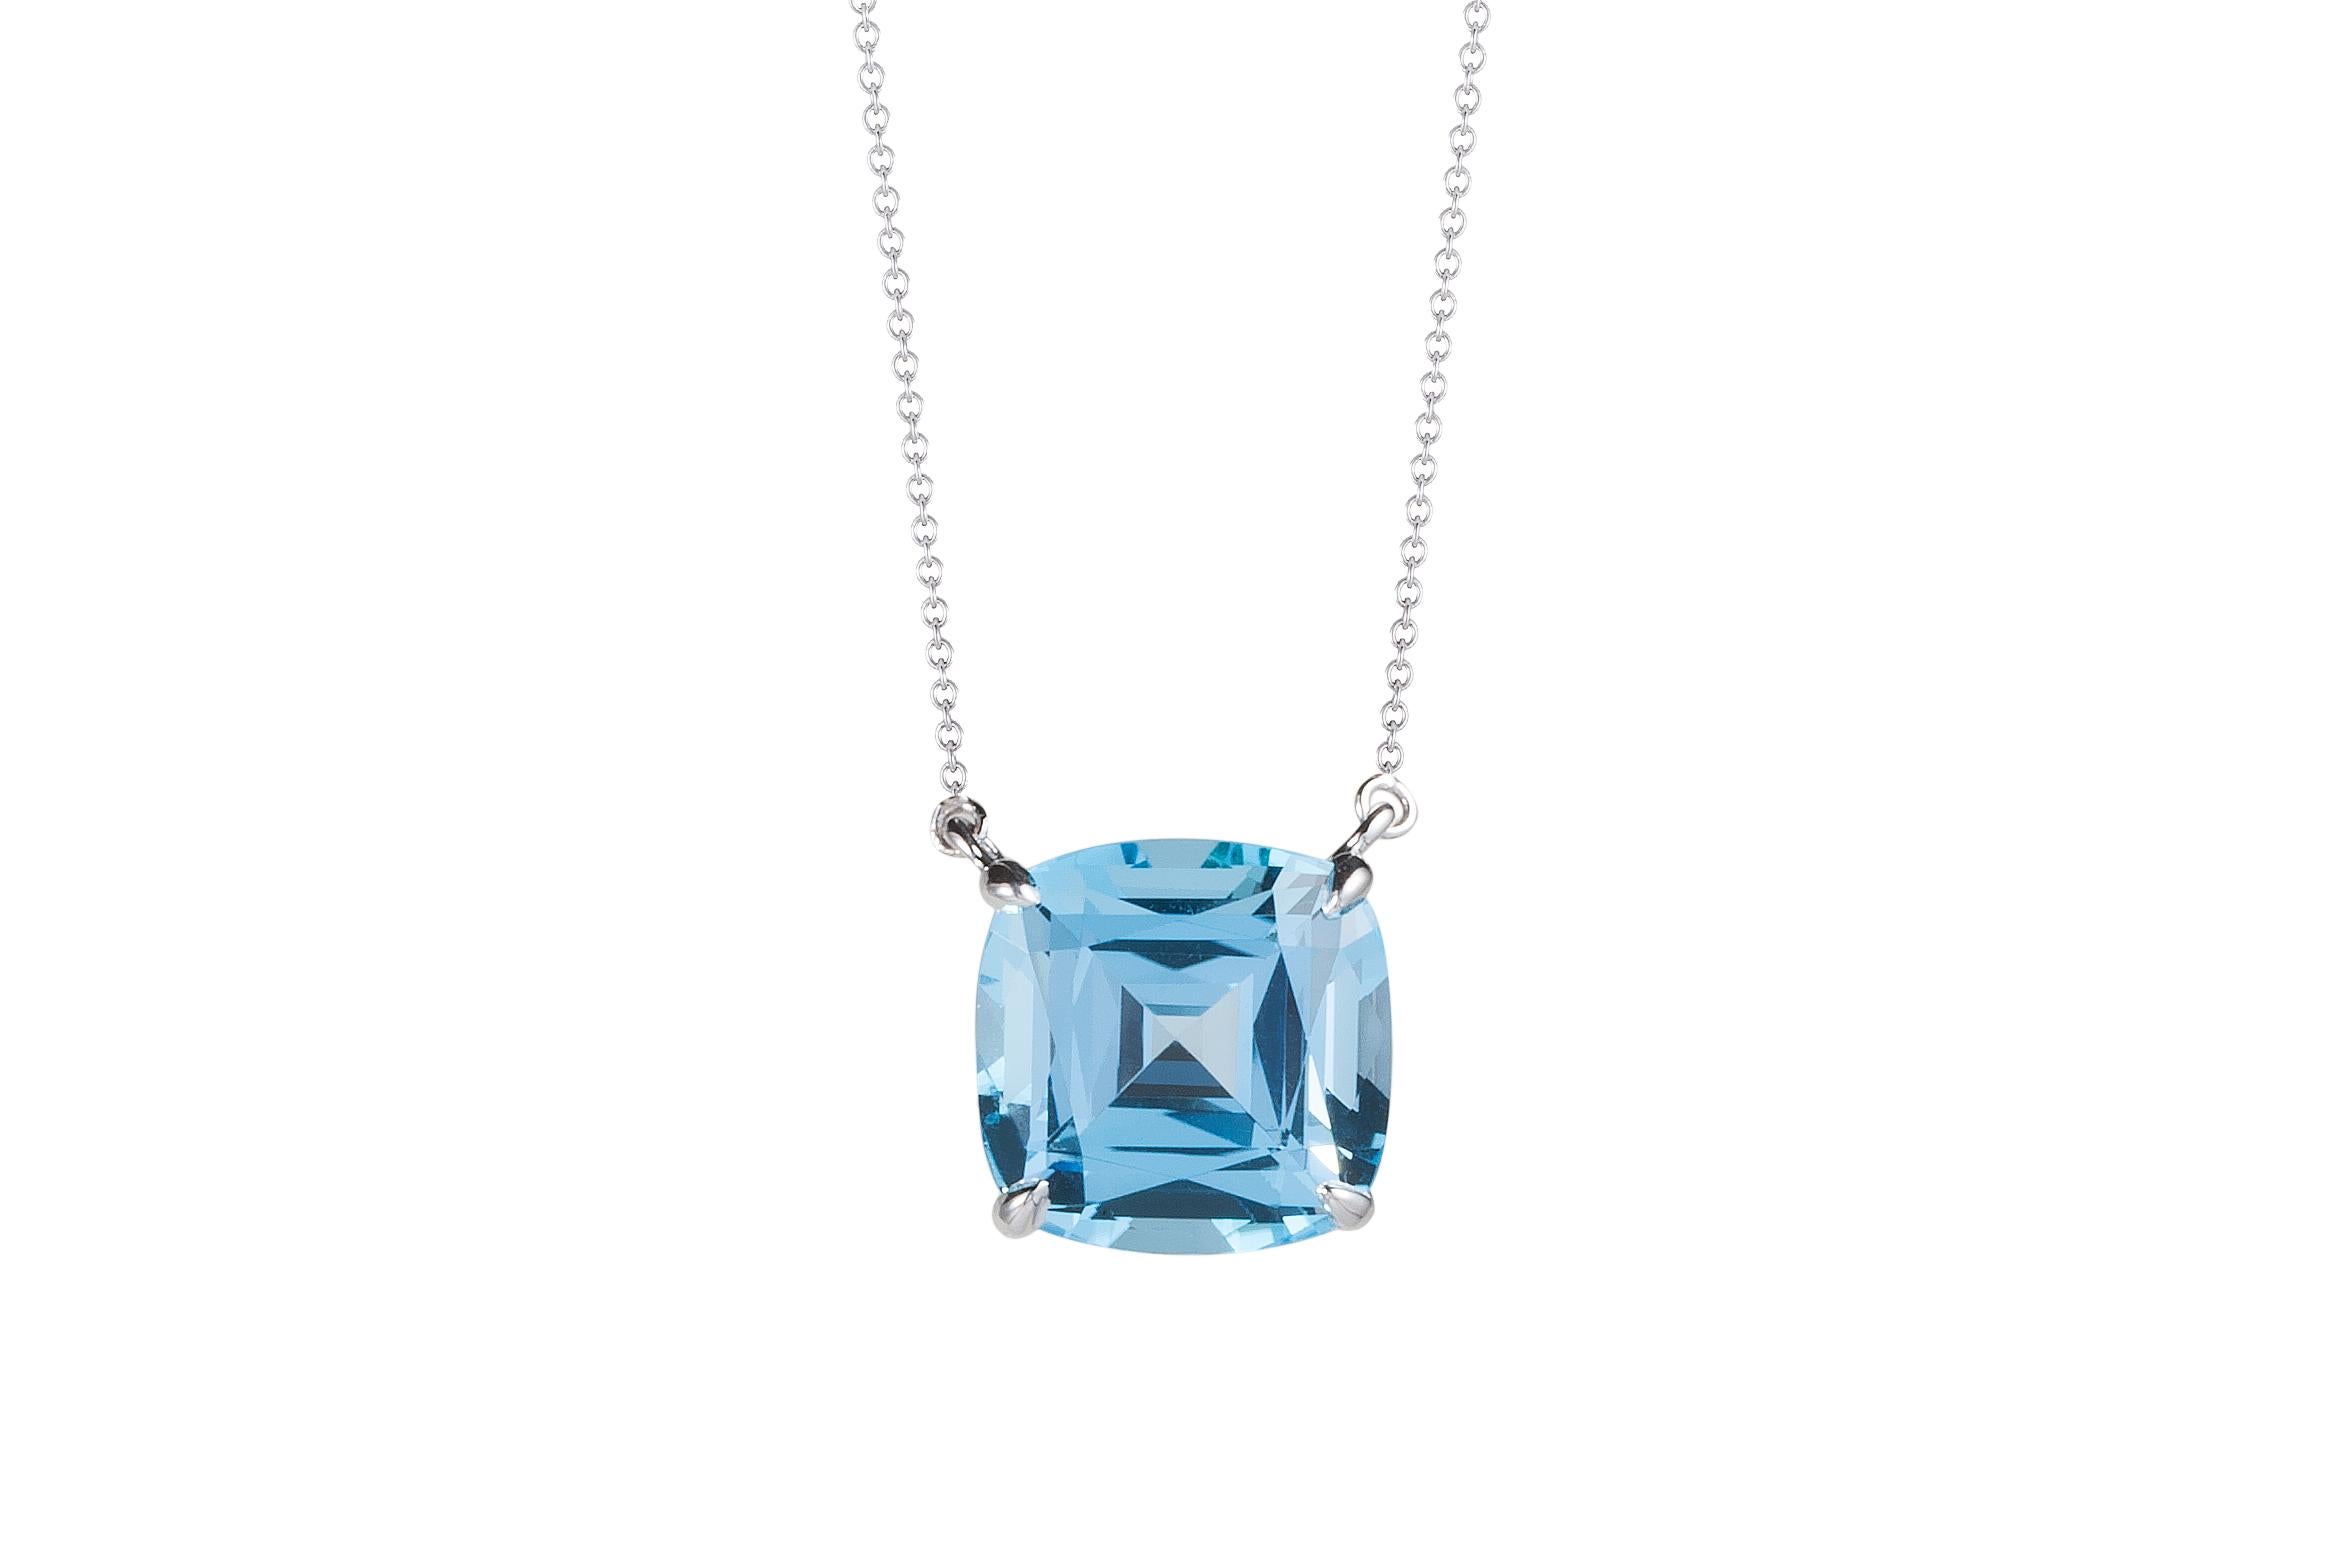 Contemporary Goshwara Blue Topaz Cushion Pendant on Cable Chain For Sale